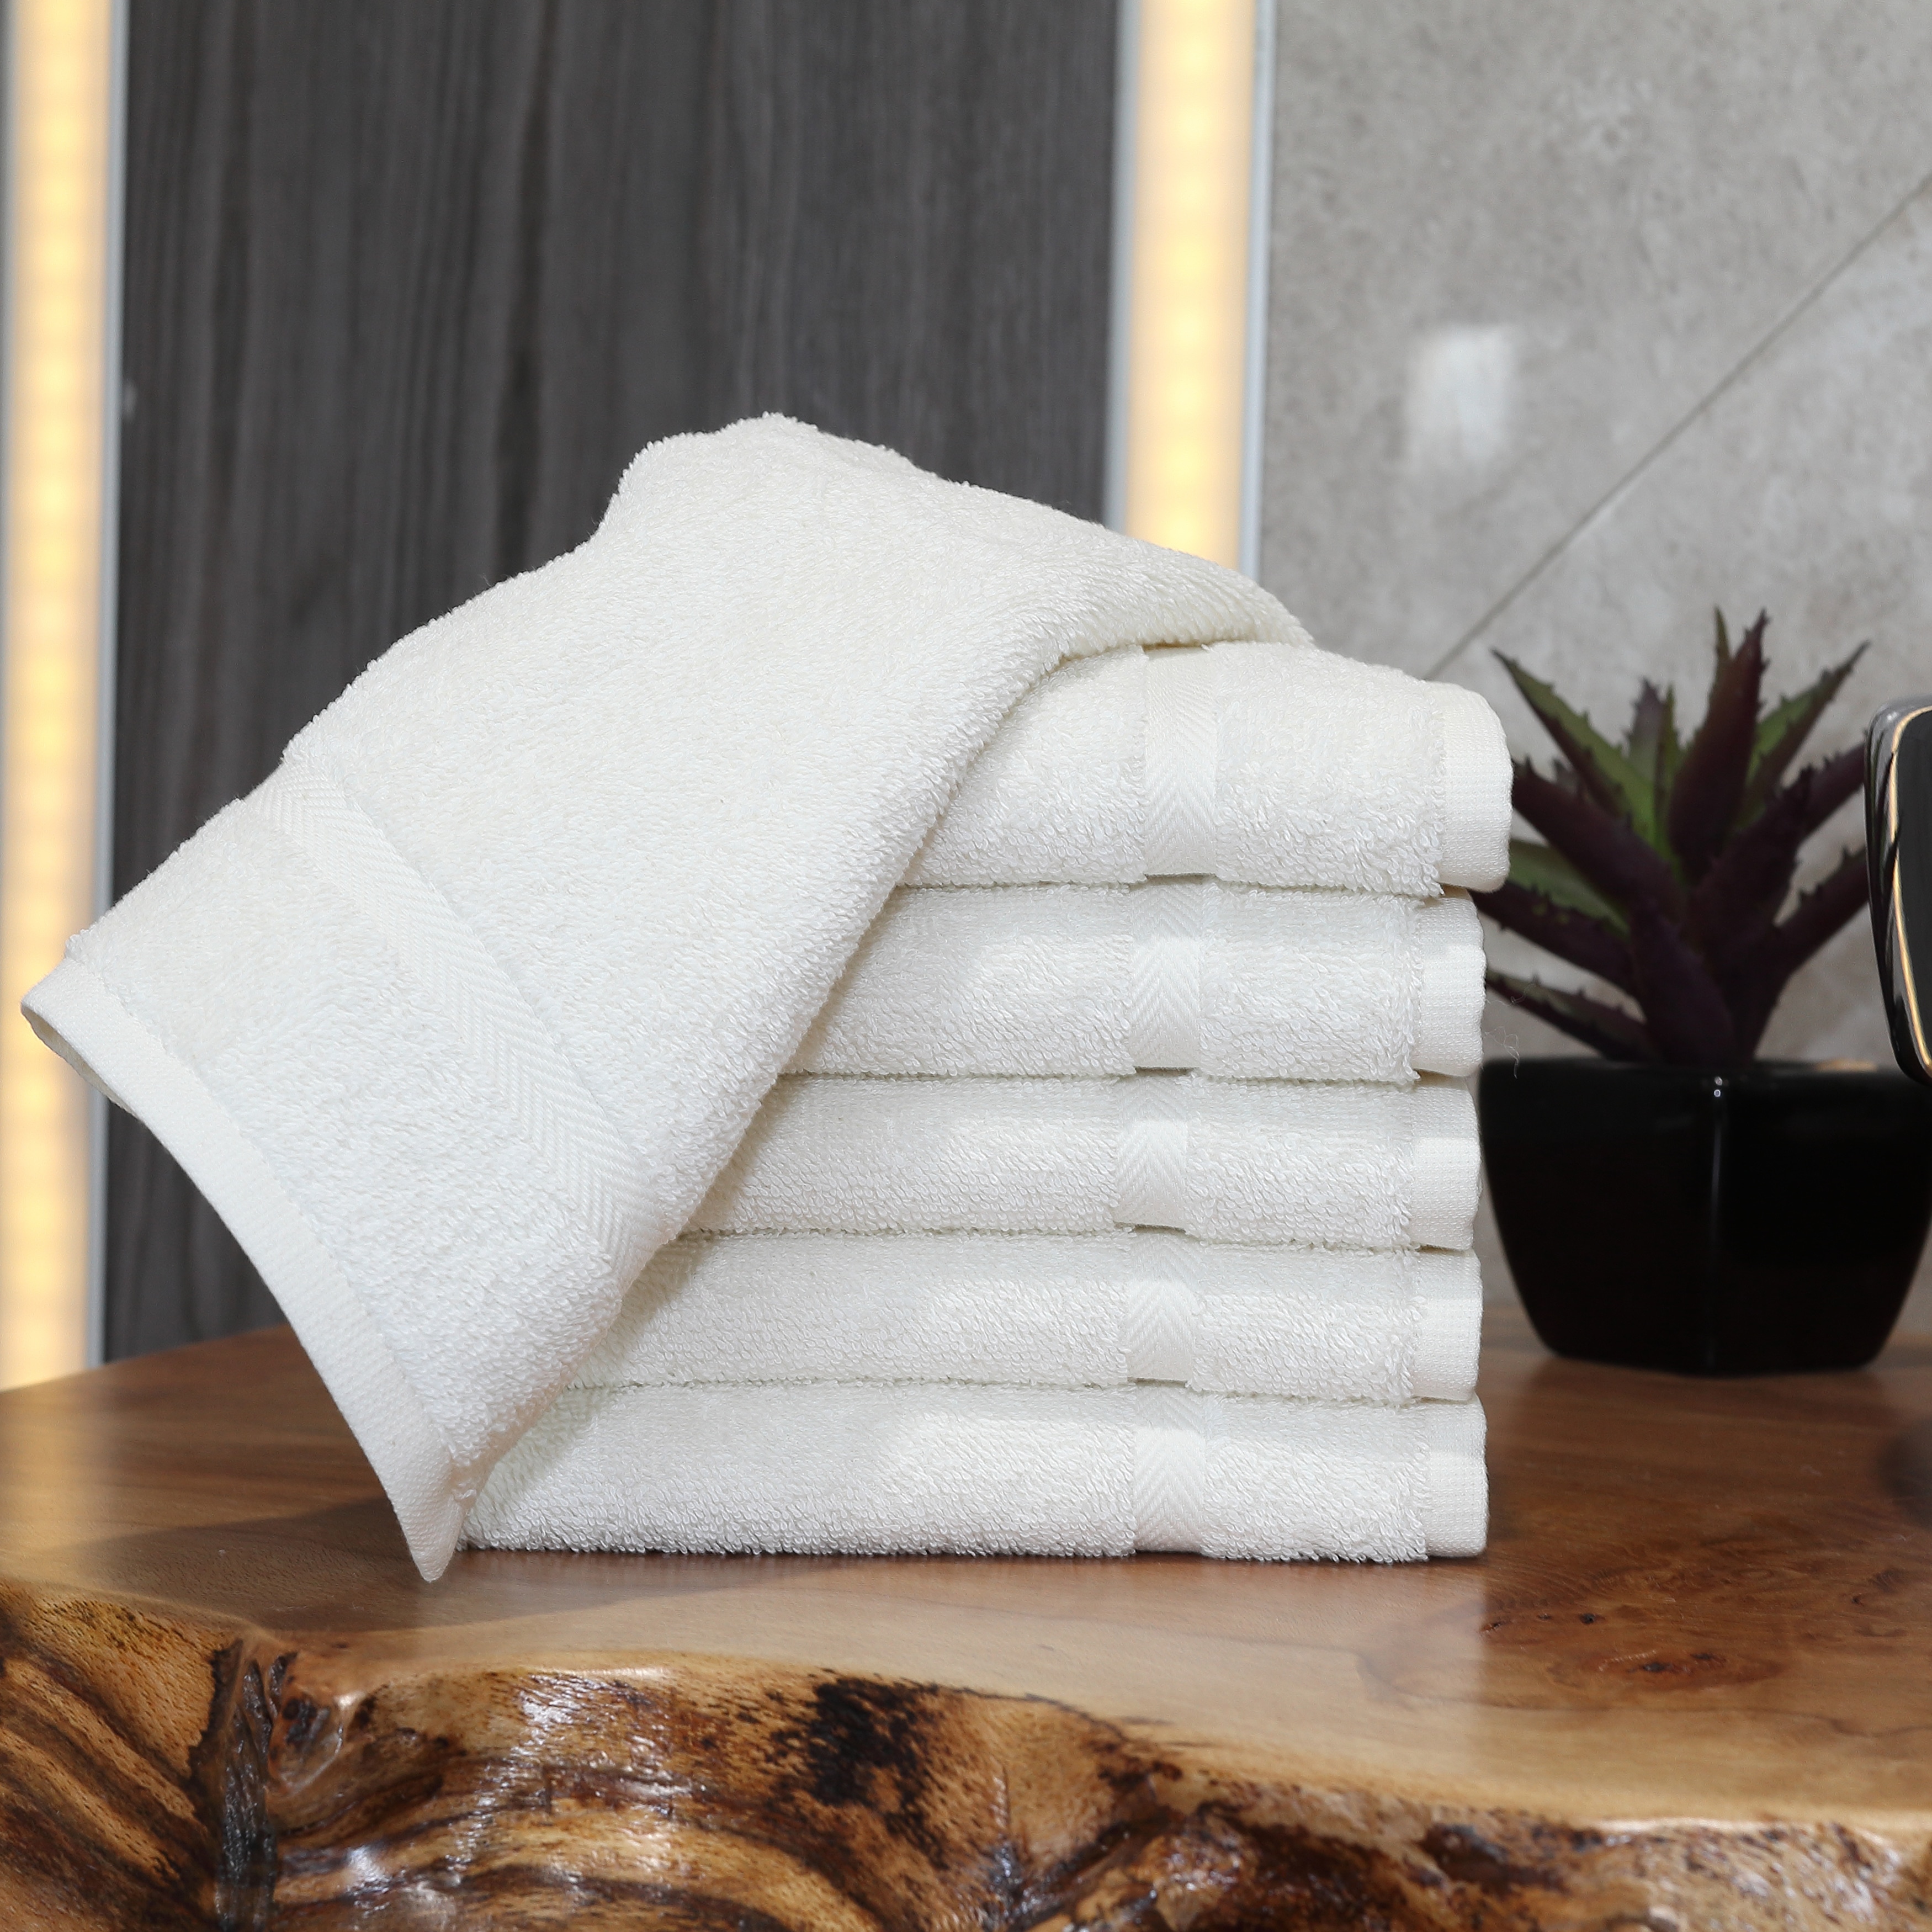 https://ak1.ostkcdn.com/images/products/11090783/Authentic-Hotel-and-Spa-Omni-Turkish-Cotton-Terry-Washcloths-Set-of-6-e81ae58e-938b-42eb-8853-7f4e93e46d5c.jpg